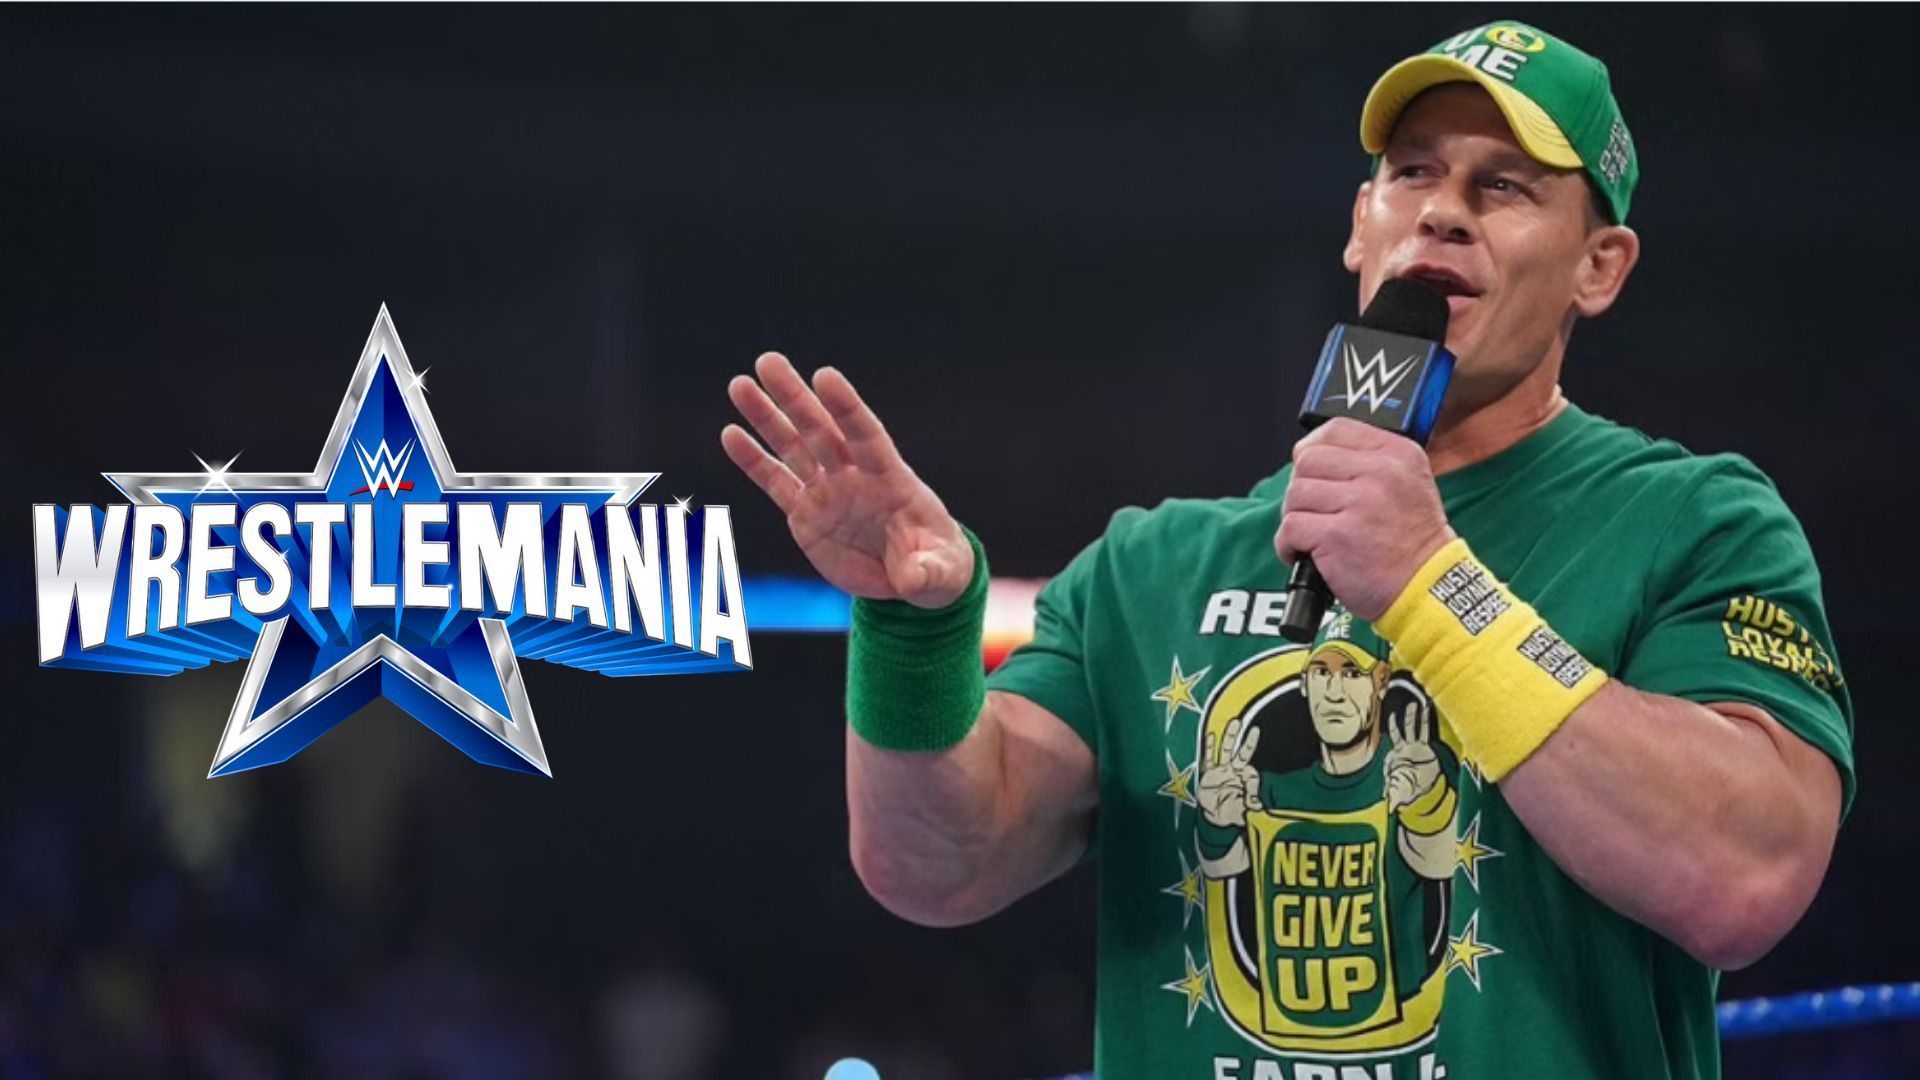 Can we see the Leader of Cenation at WrestleMania 38?